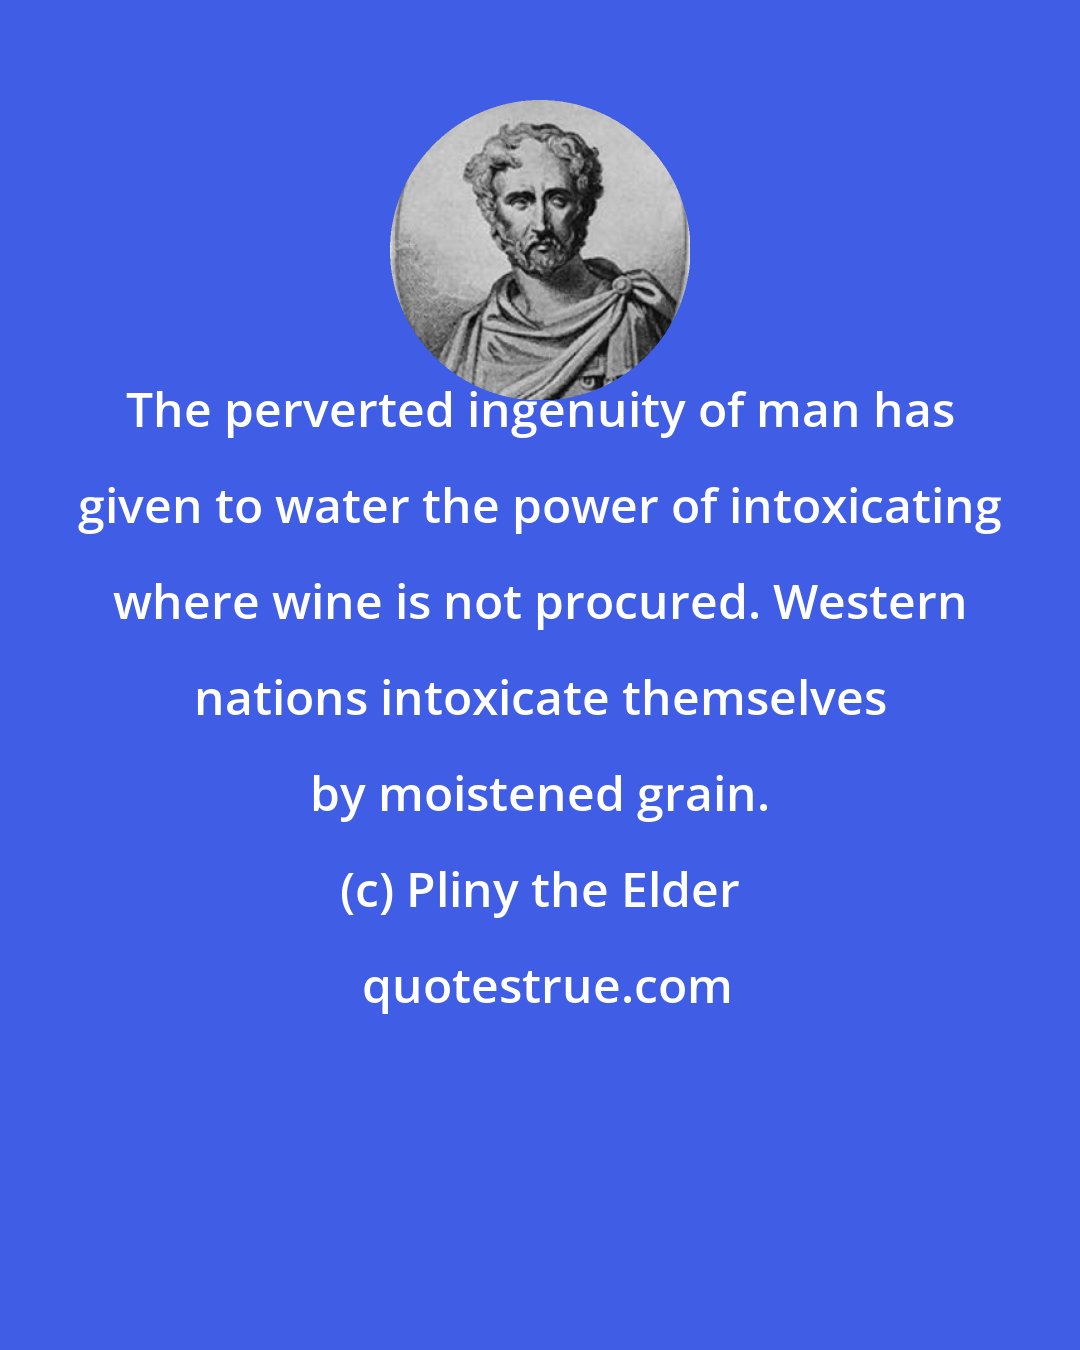 Pliny the Elder: The perverted ingenuity of man has given to water the power of intoxicating where wine is not procured. Western nations intoxicate themselves by moistened grain.